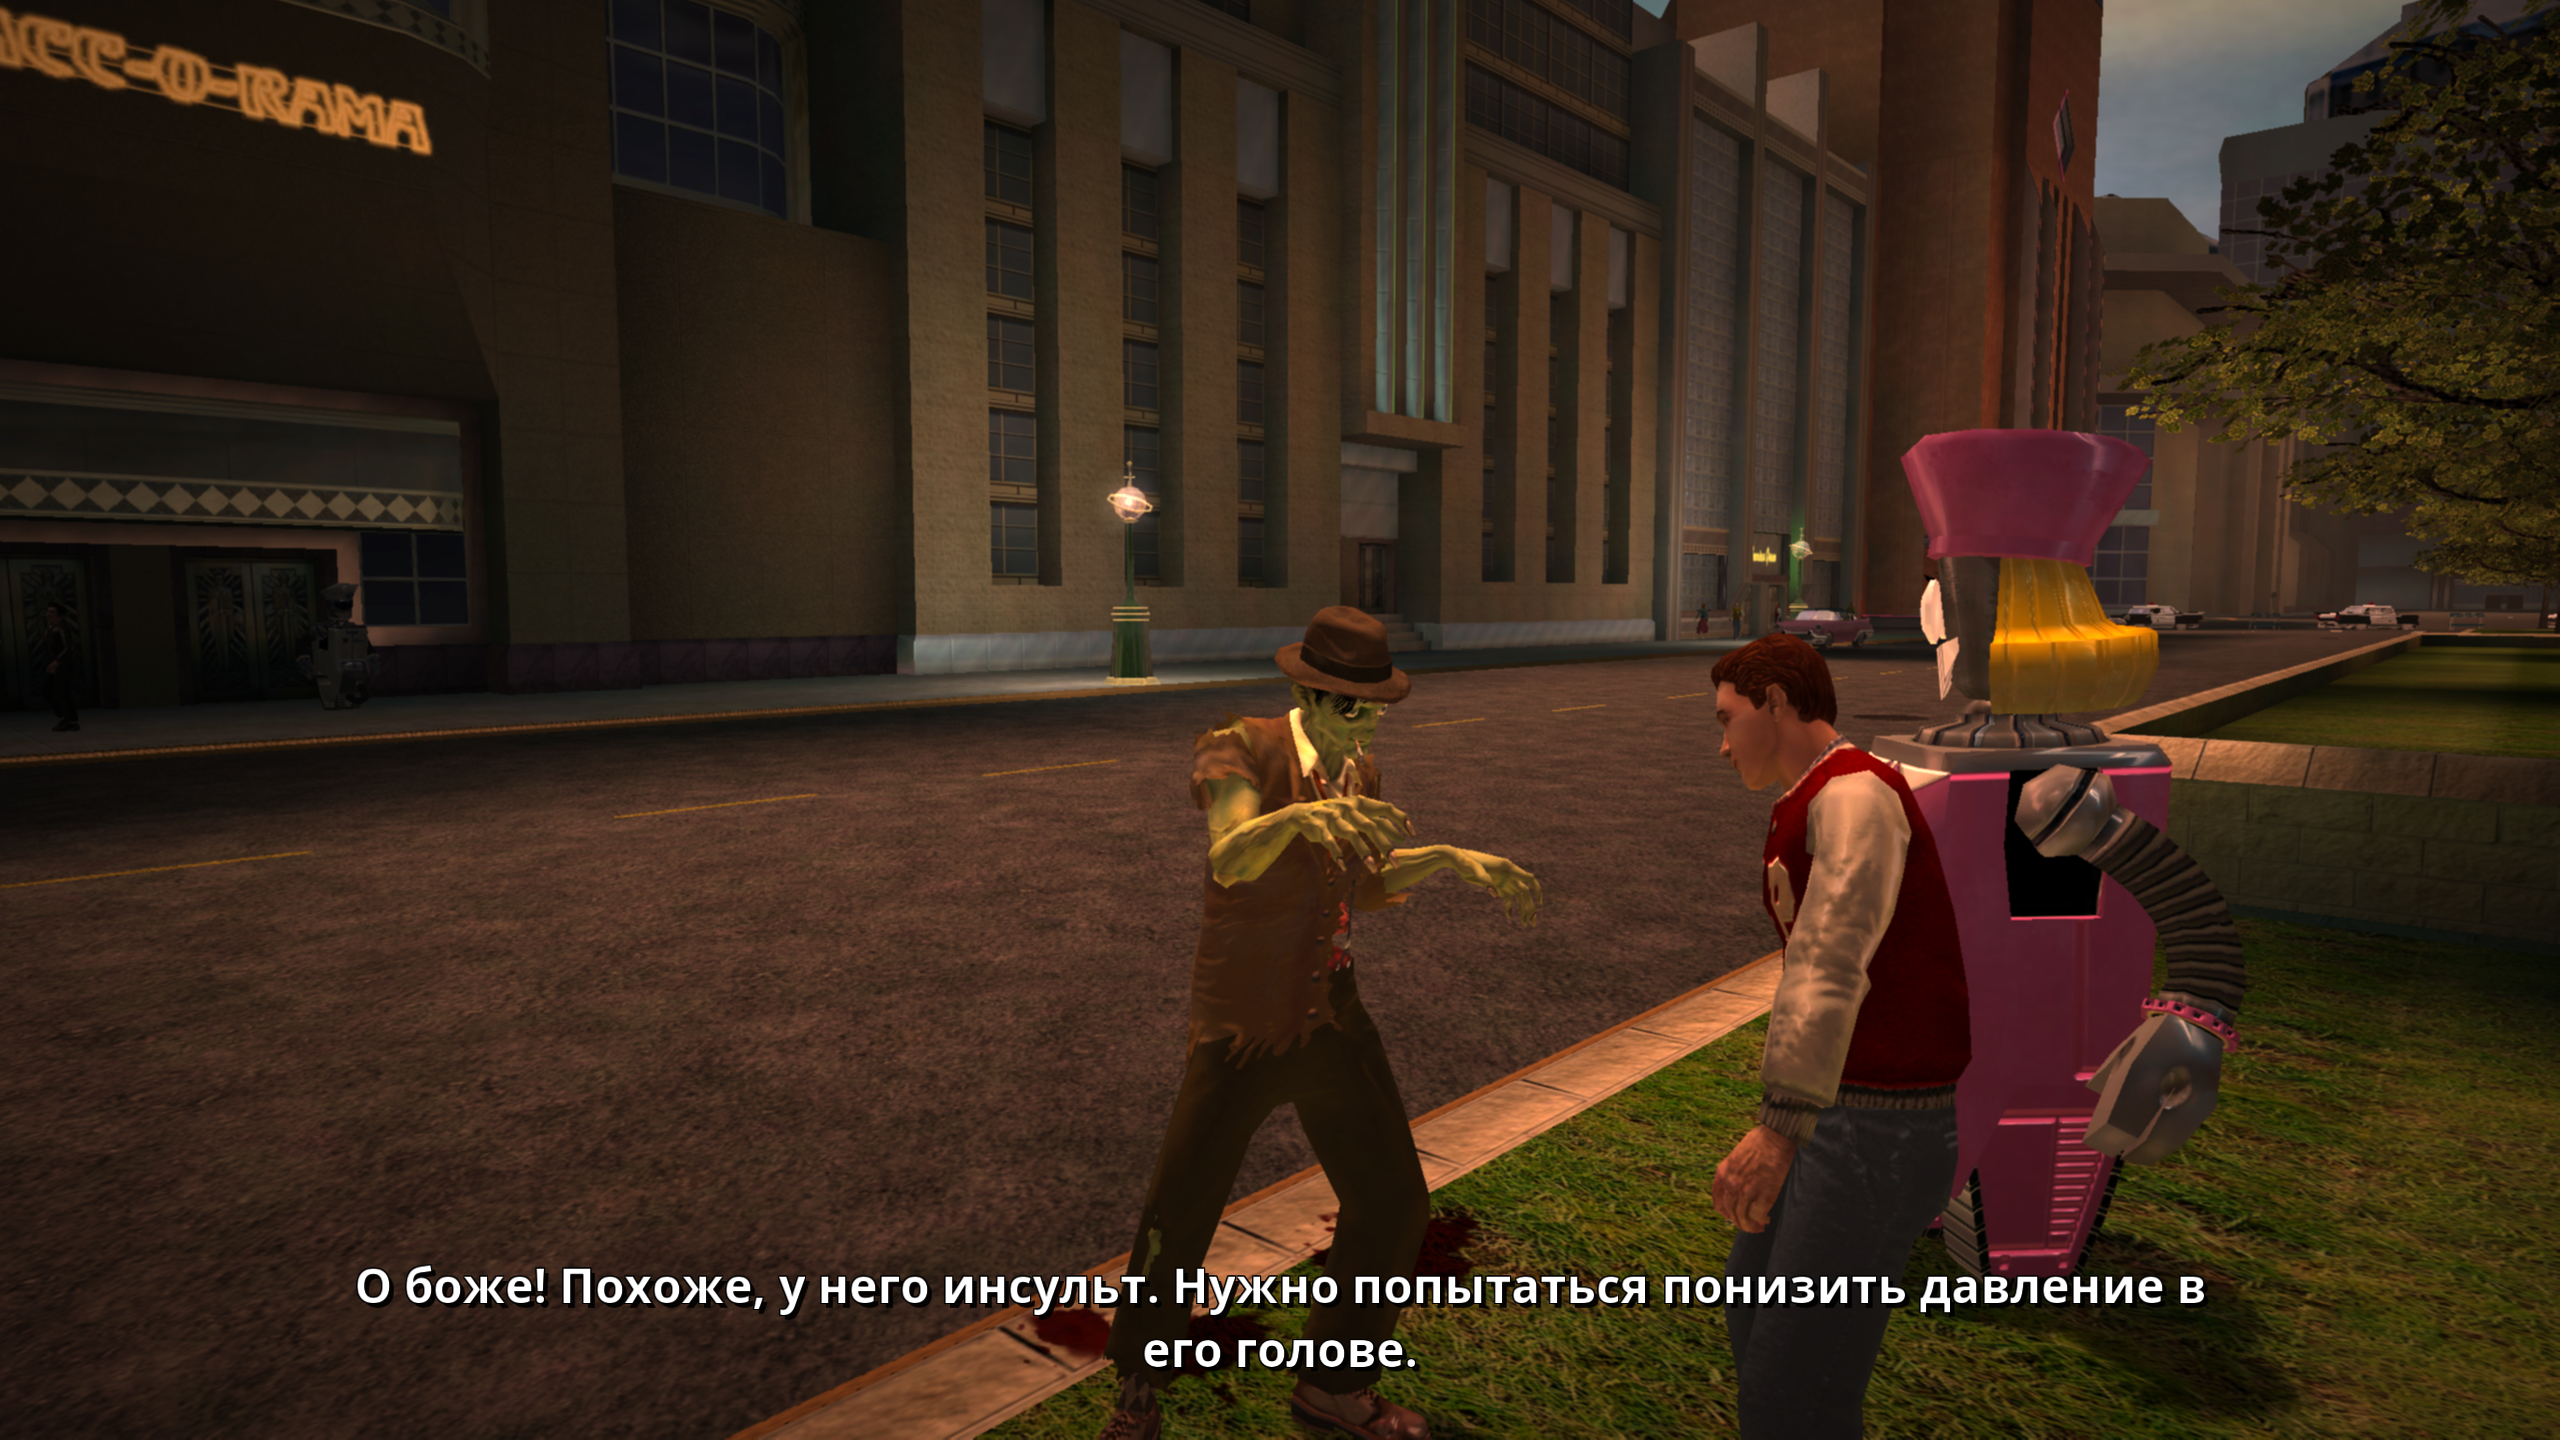 Скриншот 3 к игре Stubbs the Zombie in Rebel Without a Pulse [GOG] (2005-2021) PC | Лицензия